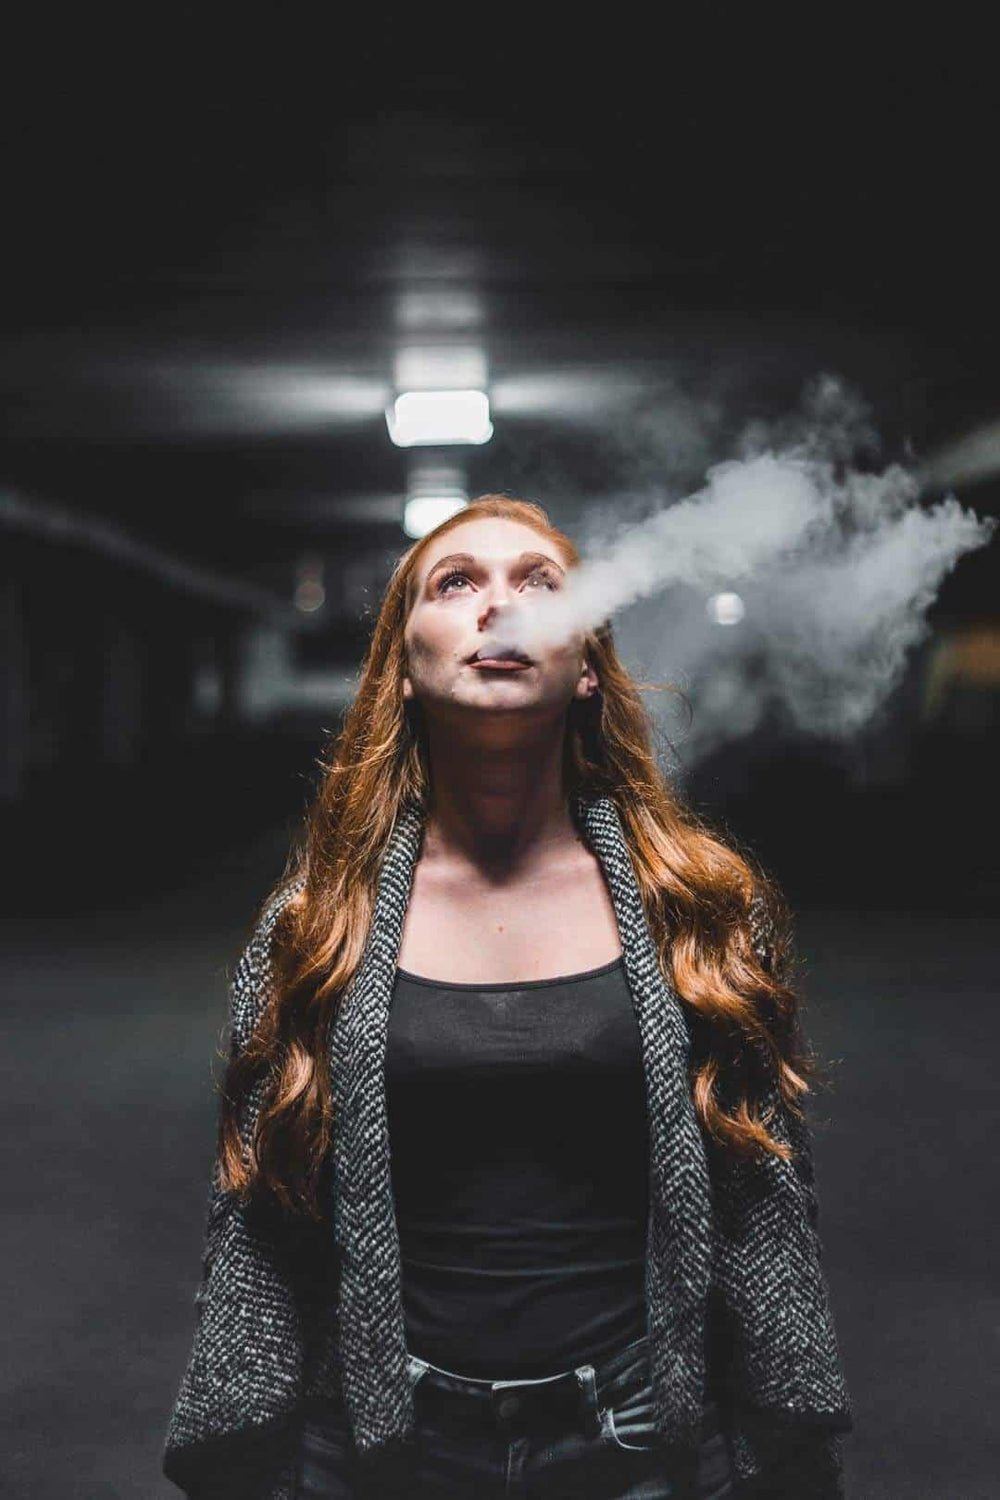 Vaping Novice? 5 Things to Consider Before Buying a Vape